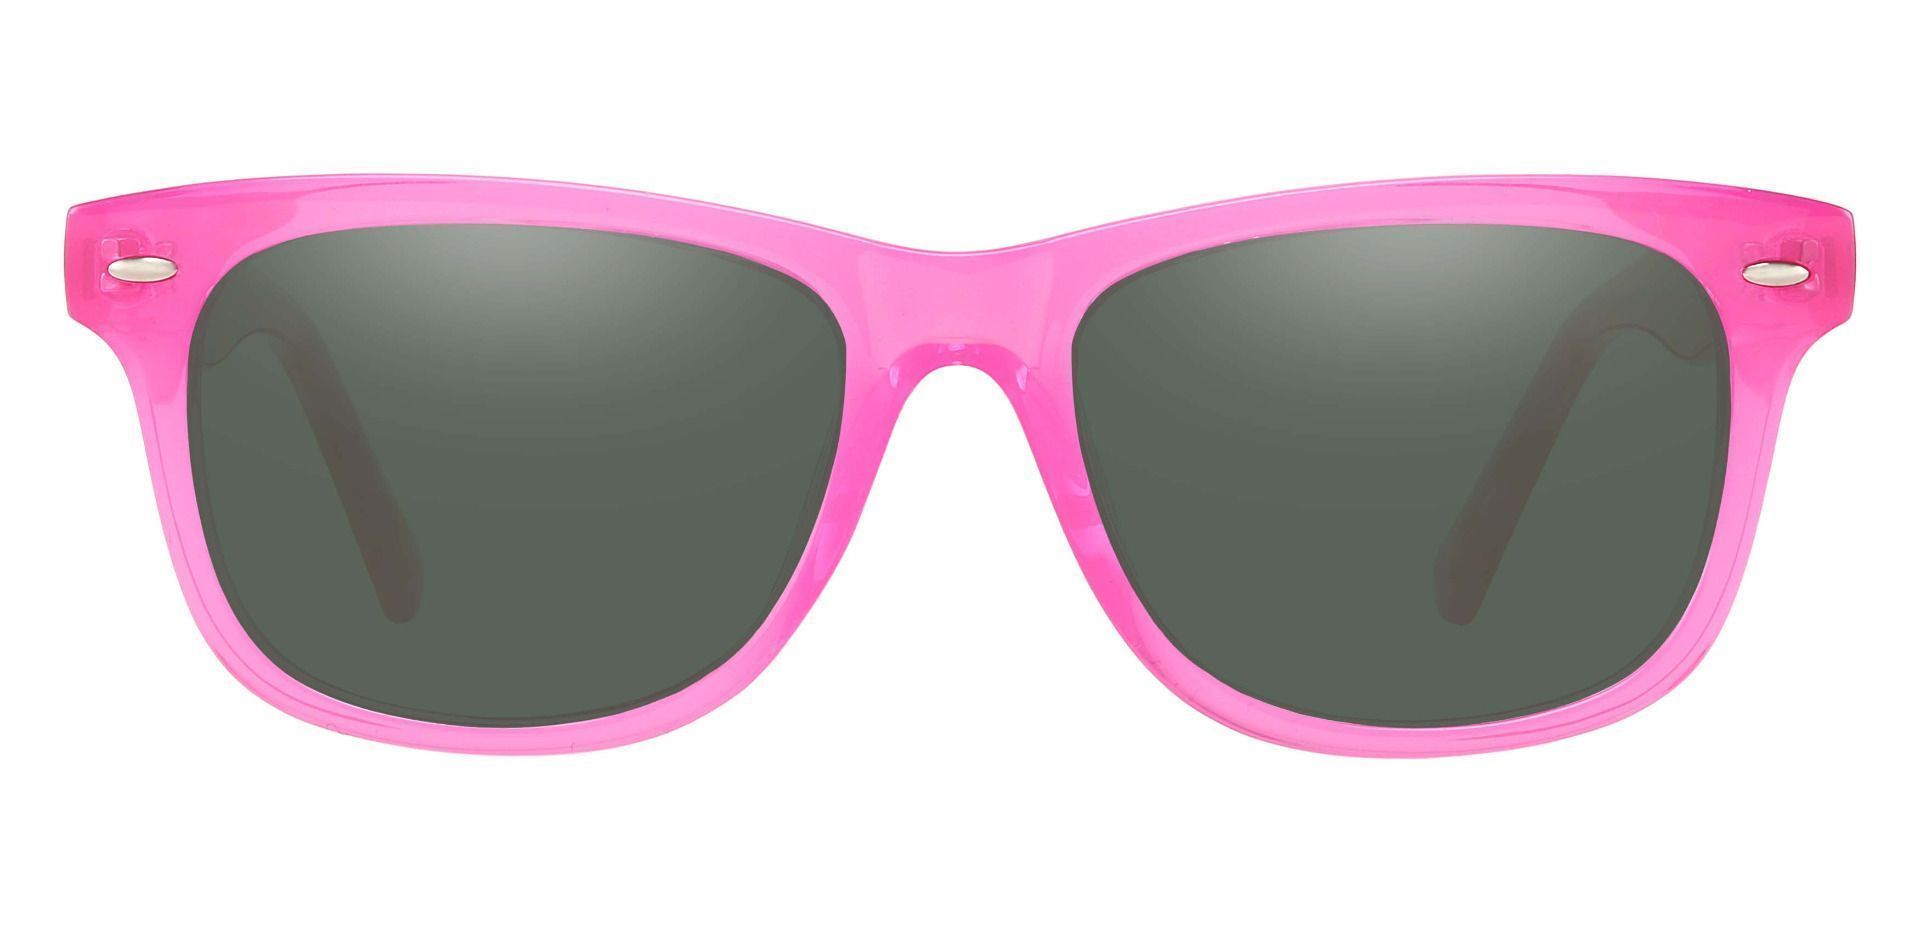 Eureka Square Reading Sunglasses - Pink Frame With Green Lenses